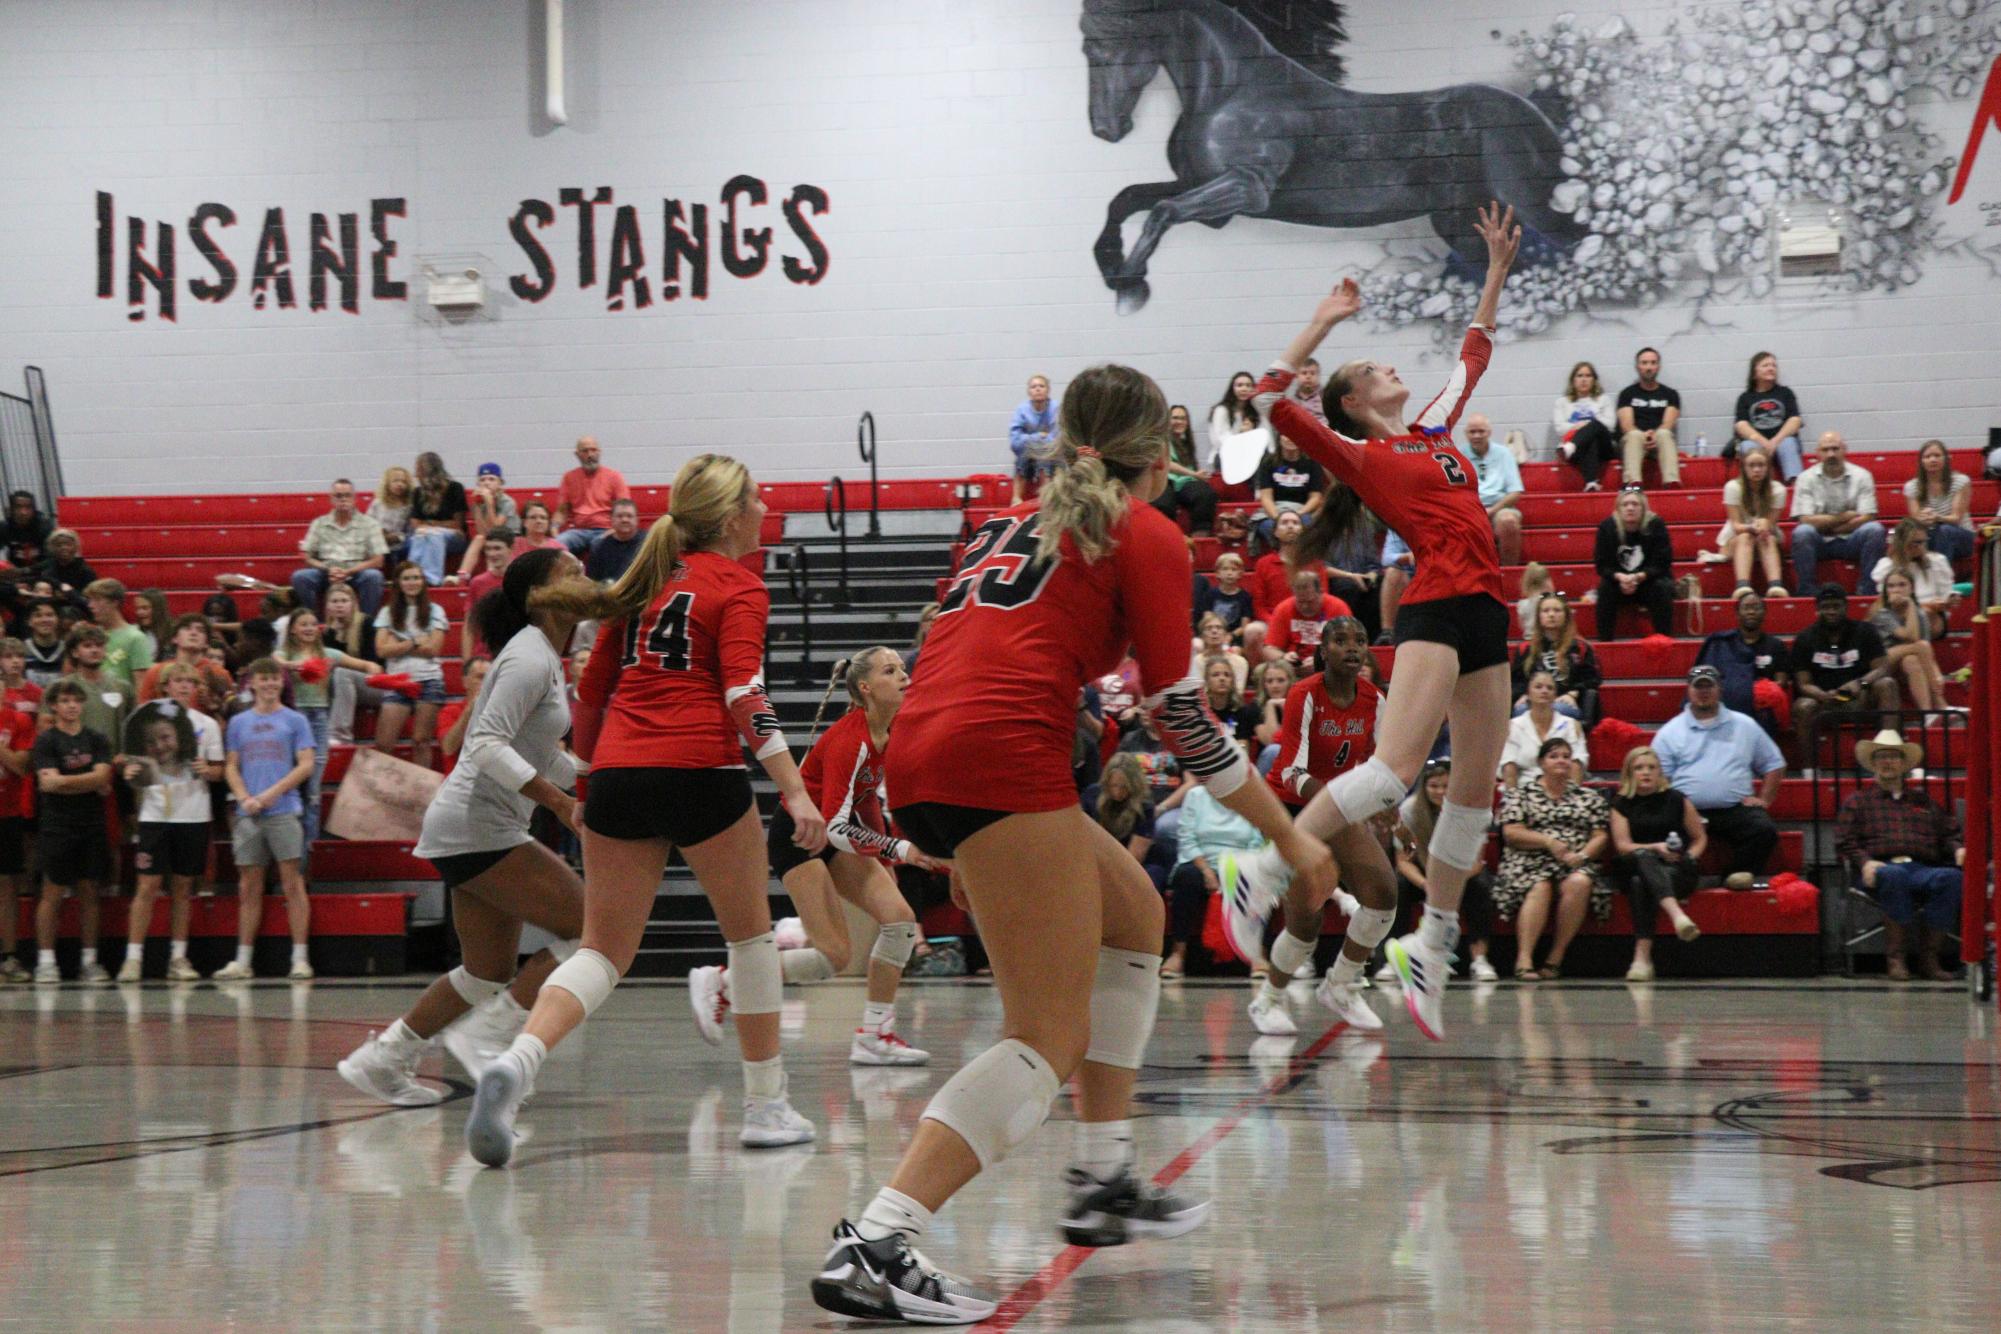 On+Tuesday%2C+October+3rd+for+their+senior+night%2C+the+varsity+volleyball+team+defeated+Saltillo+High+School%2C+25-19%2C+25-22%2C+25-17.+It+was+the+second+meeting+between+the+two+6A+squads+this+season.+Center+Hill+now+sits+8-2+in+district+play.